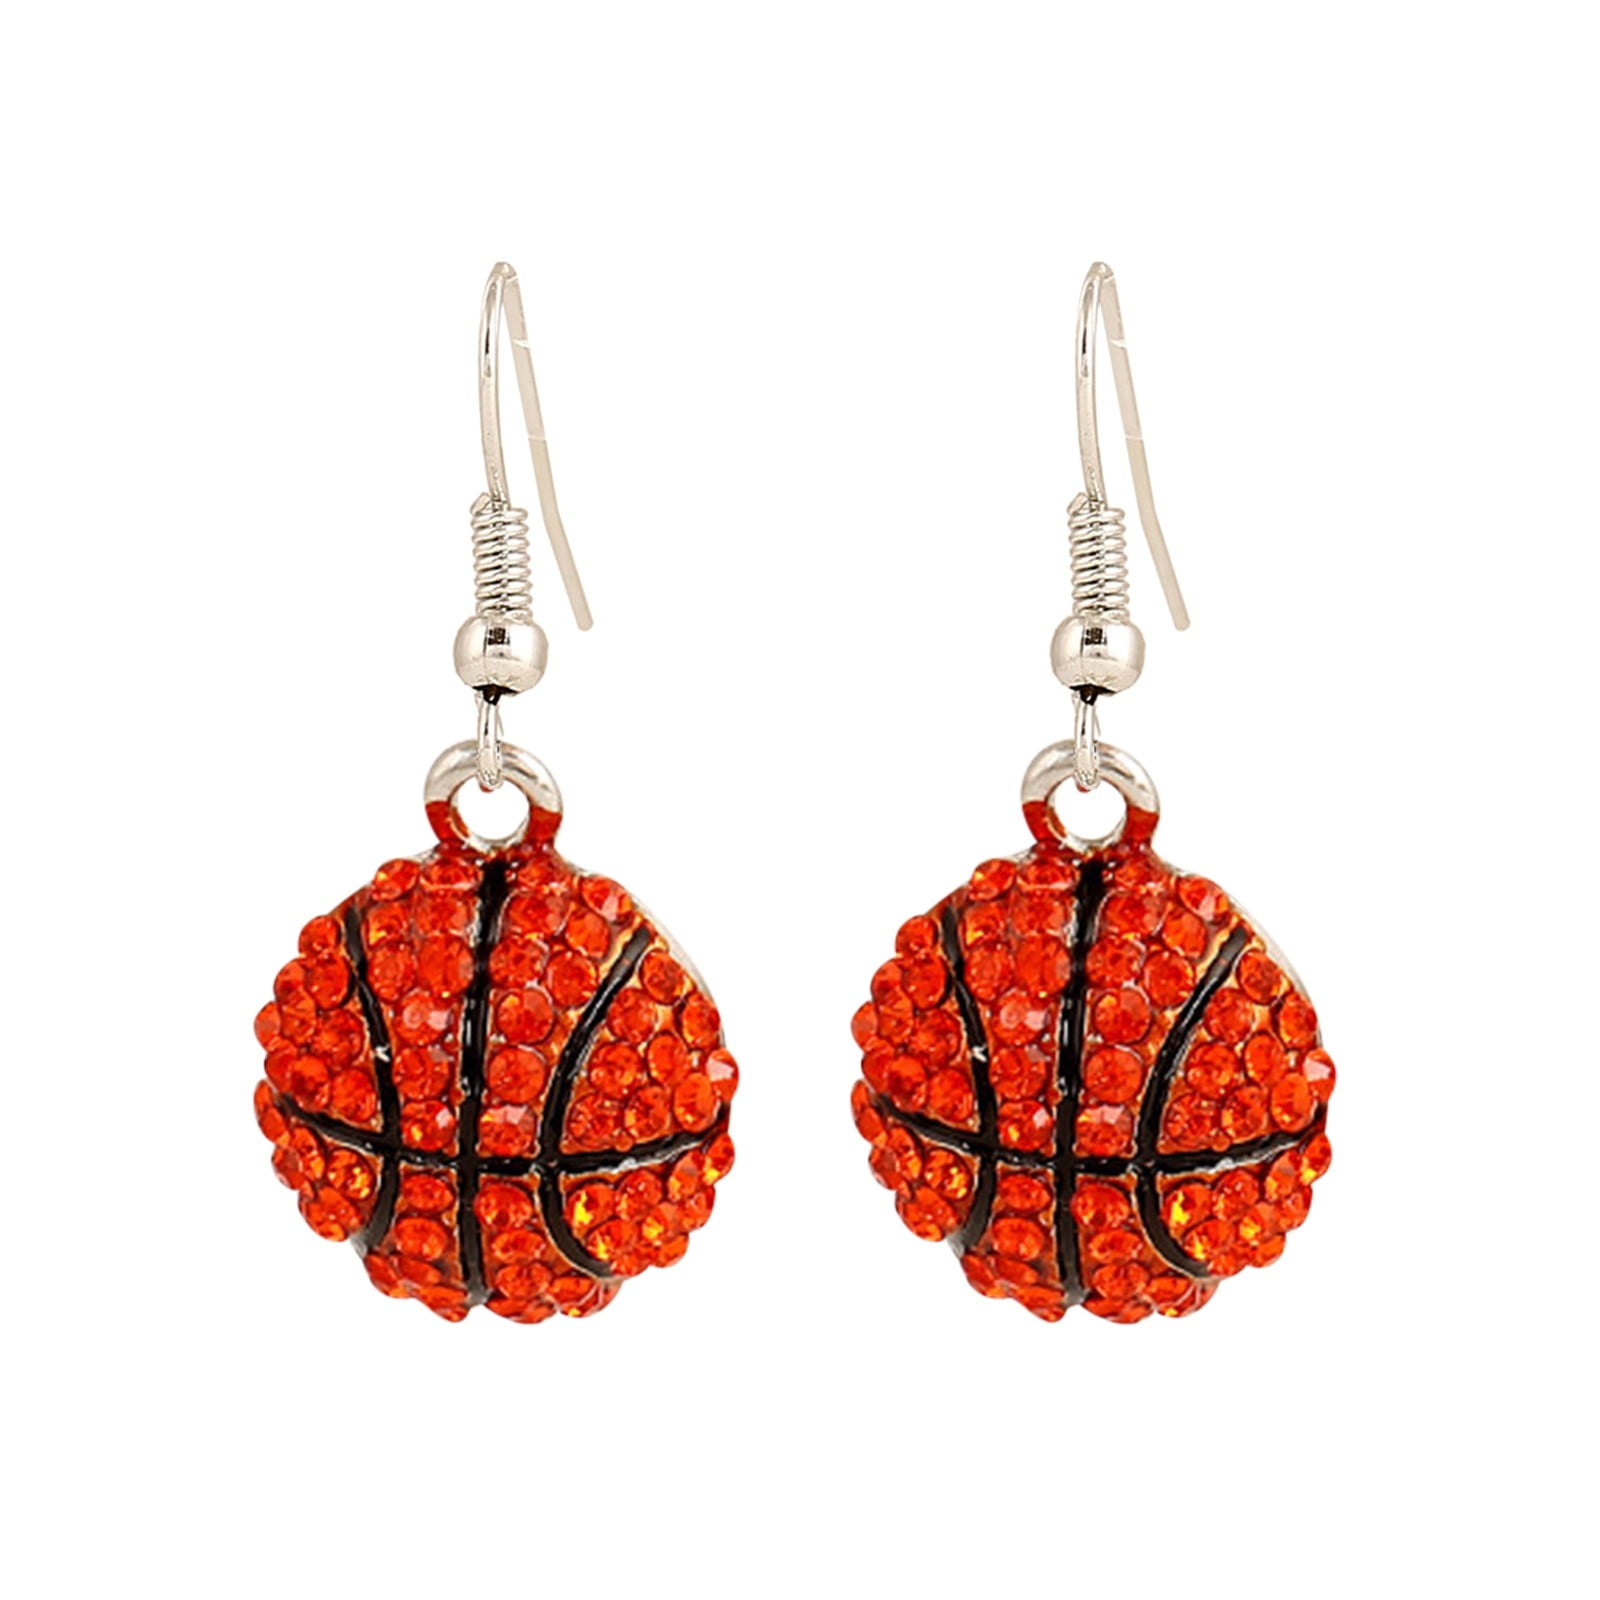 A Ball Game Stud Earrings Gifts for Women Girls Basketball Gifts for Players Mom Dad Team Basket Ideas Charms Jewelry Rhinestone Earrings 